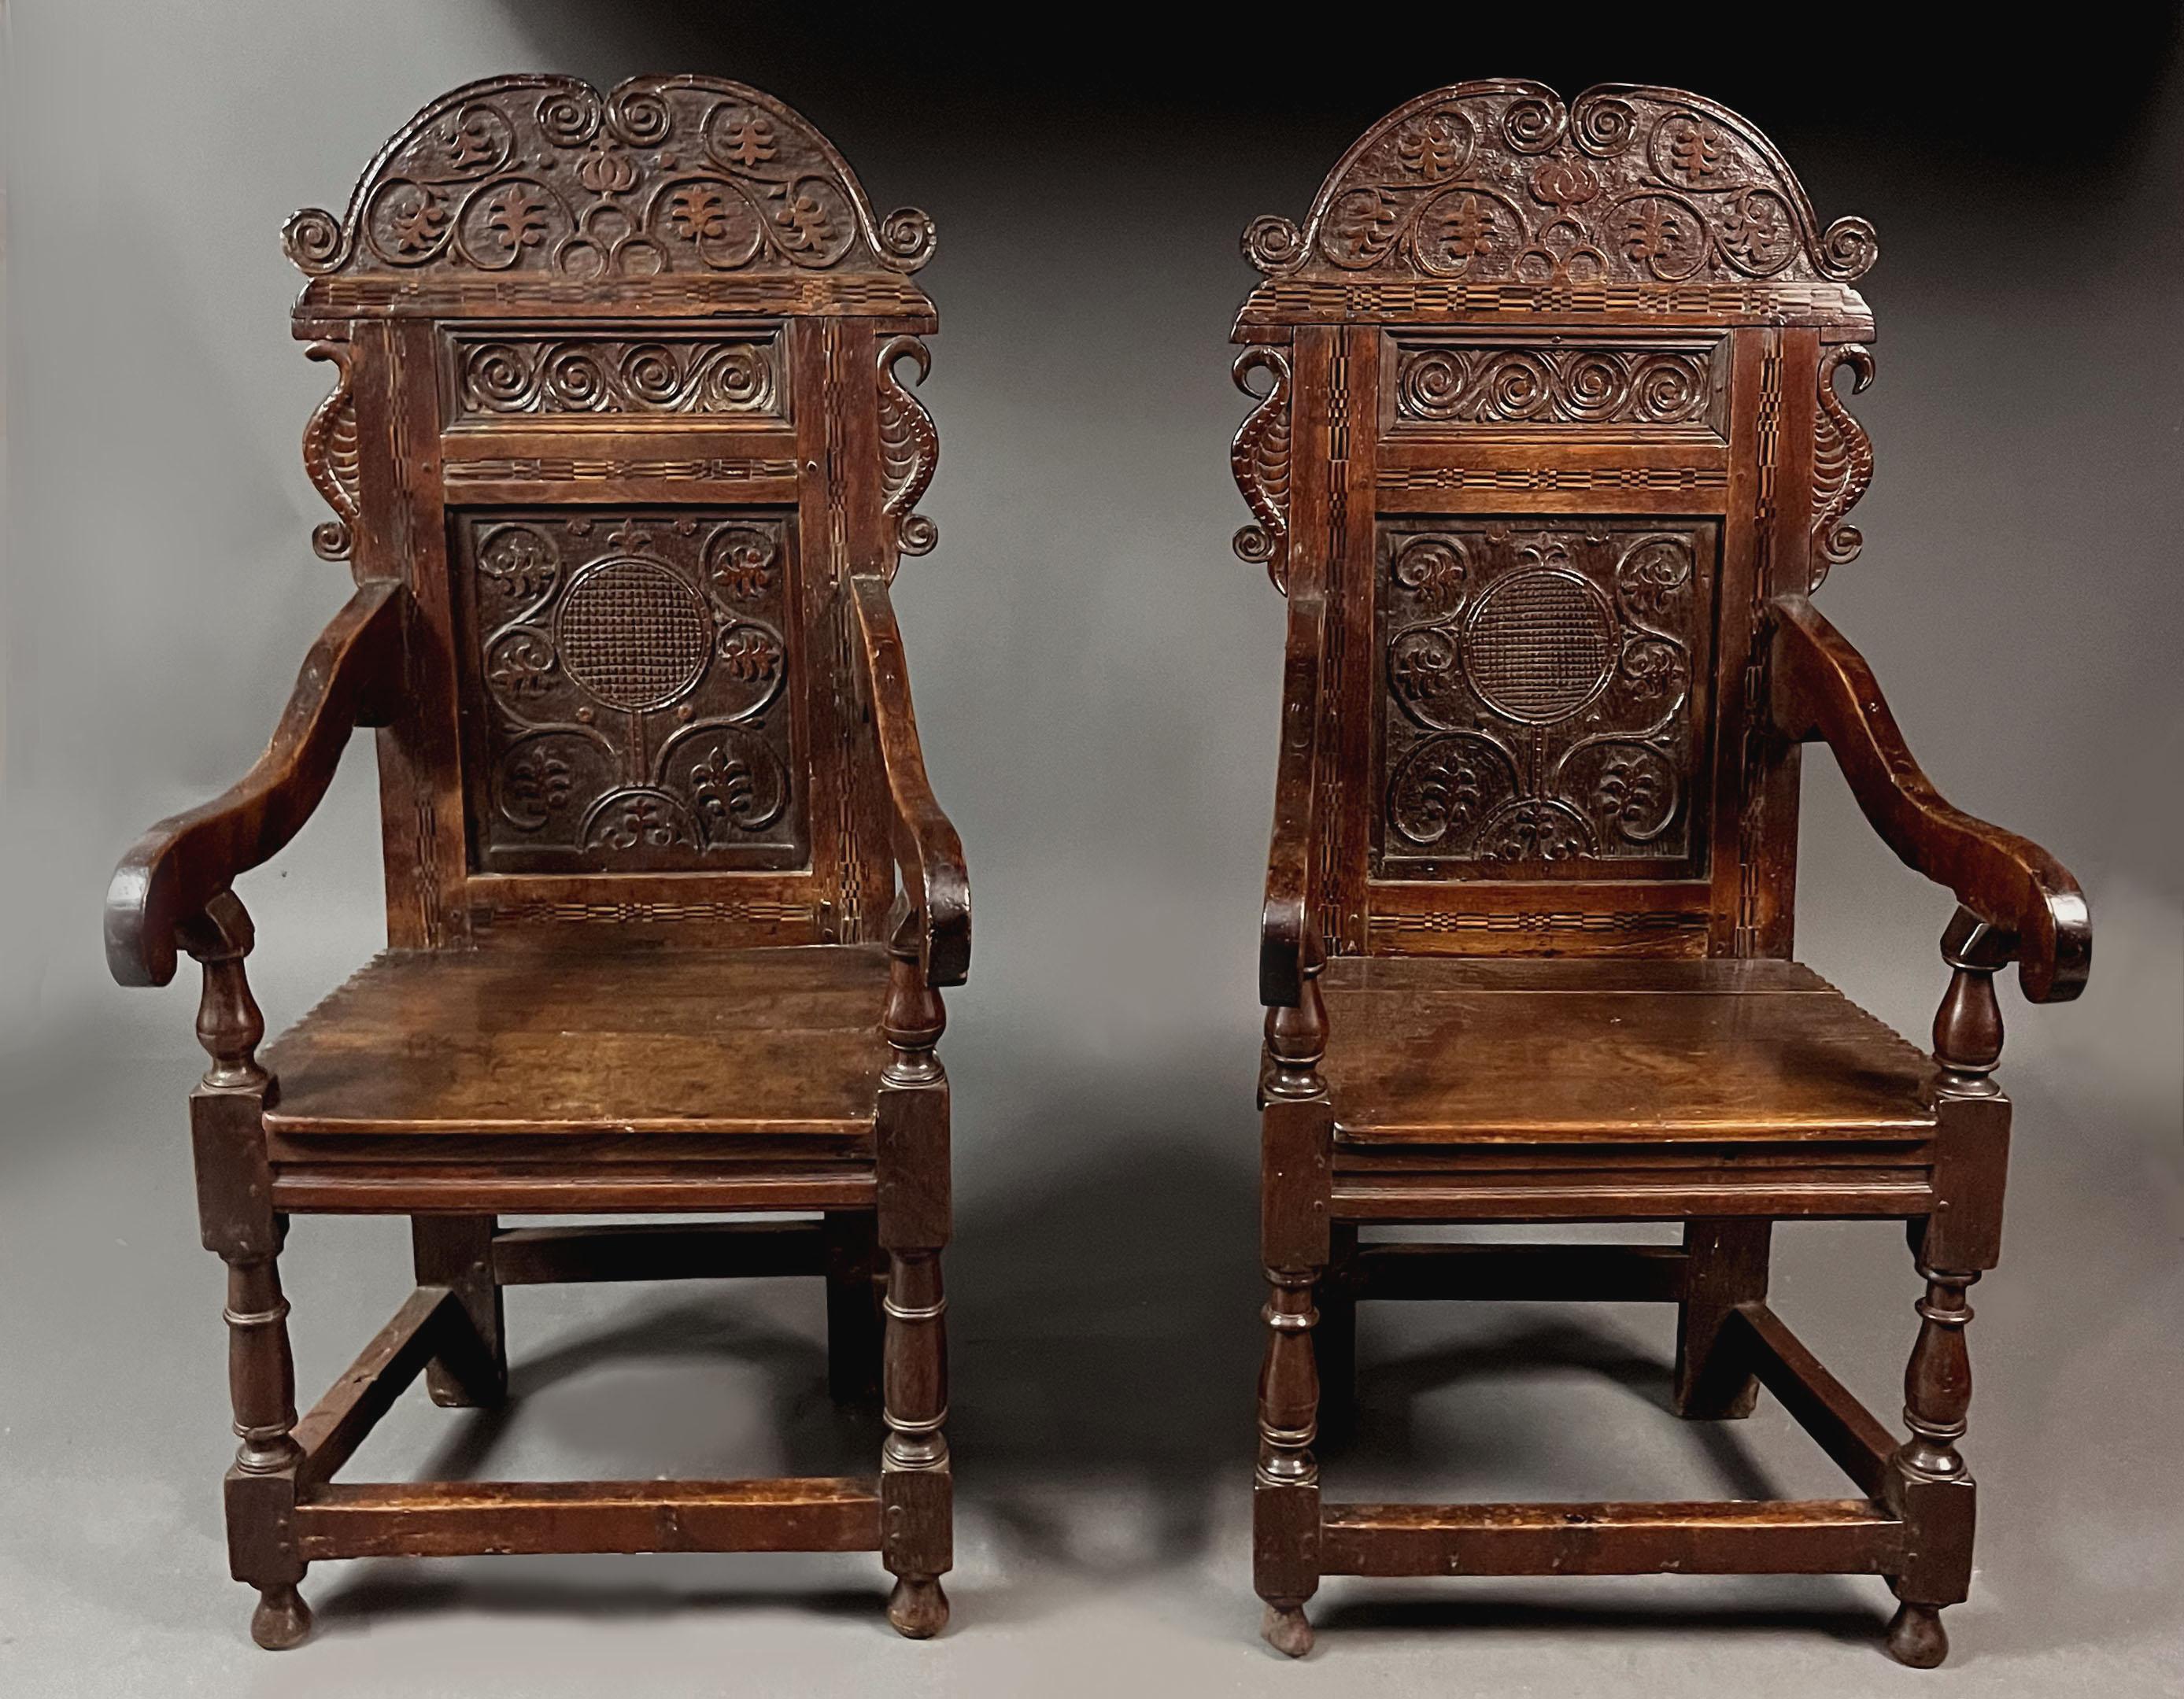 A rare pair of late 17th century oak wainscot chairs. Very striking detail: grand cresting rail with very similar carved detail to the main panel and a further smaller panel with 4 carved scrolls, well carved 'ears' and back framing with chequered